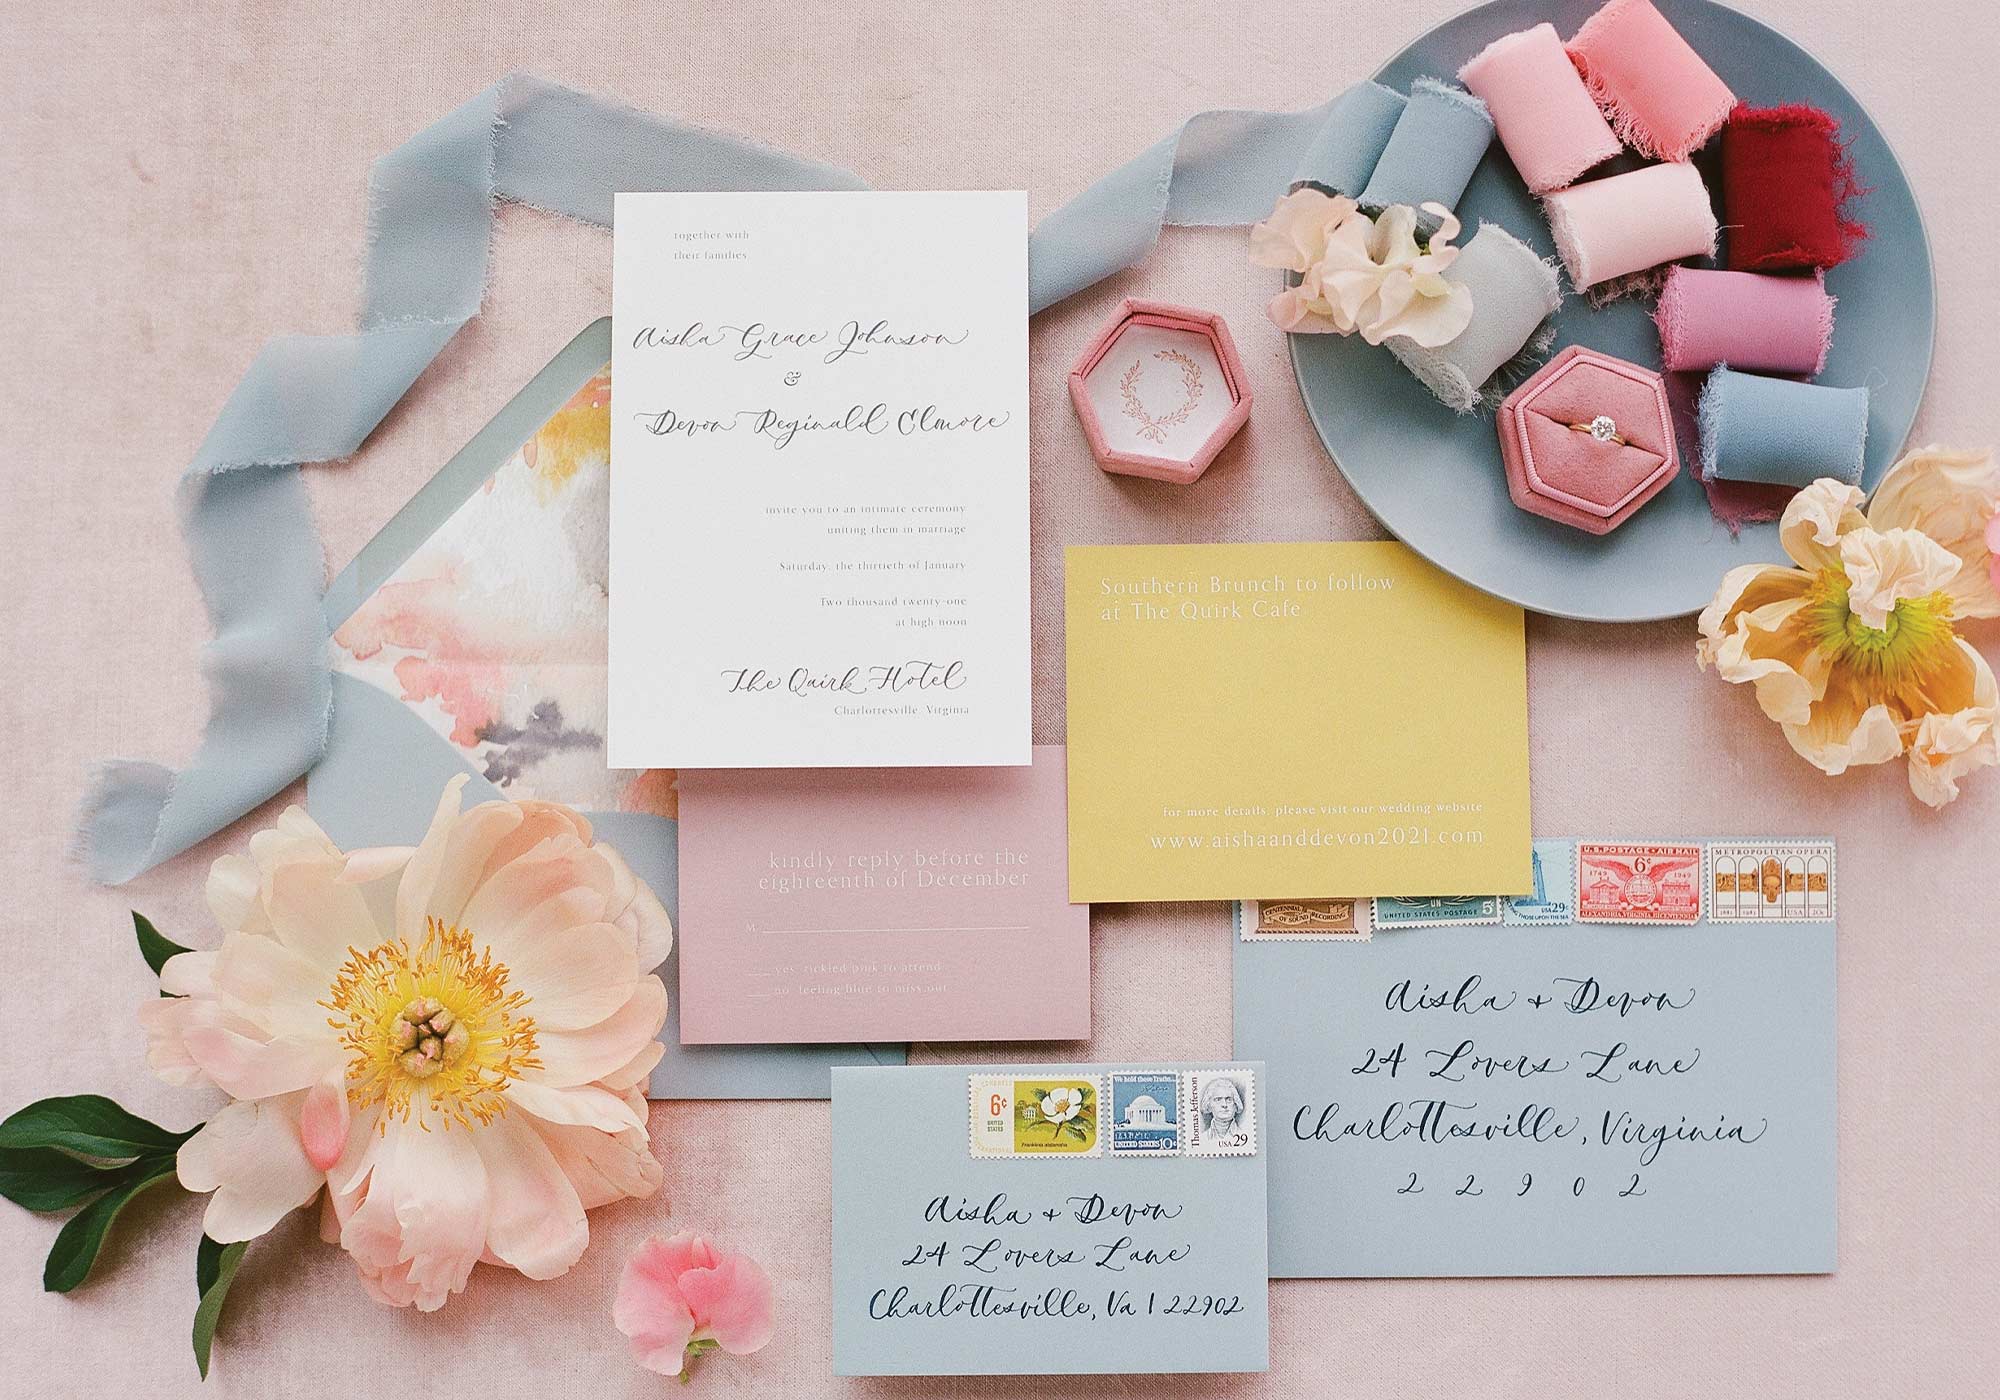 Jen Fariello Photography, Quirk Hotel Charlottesville, Southern Blooms by Pat’s Floral Designs, Just a Little Ditty, Rock Paper Scissors, Jodi Macfarlan Calligraphy